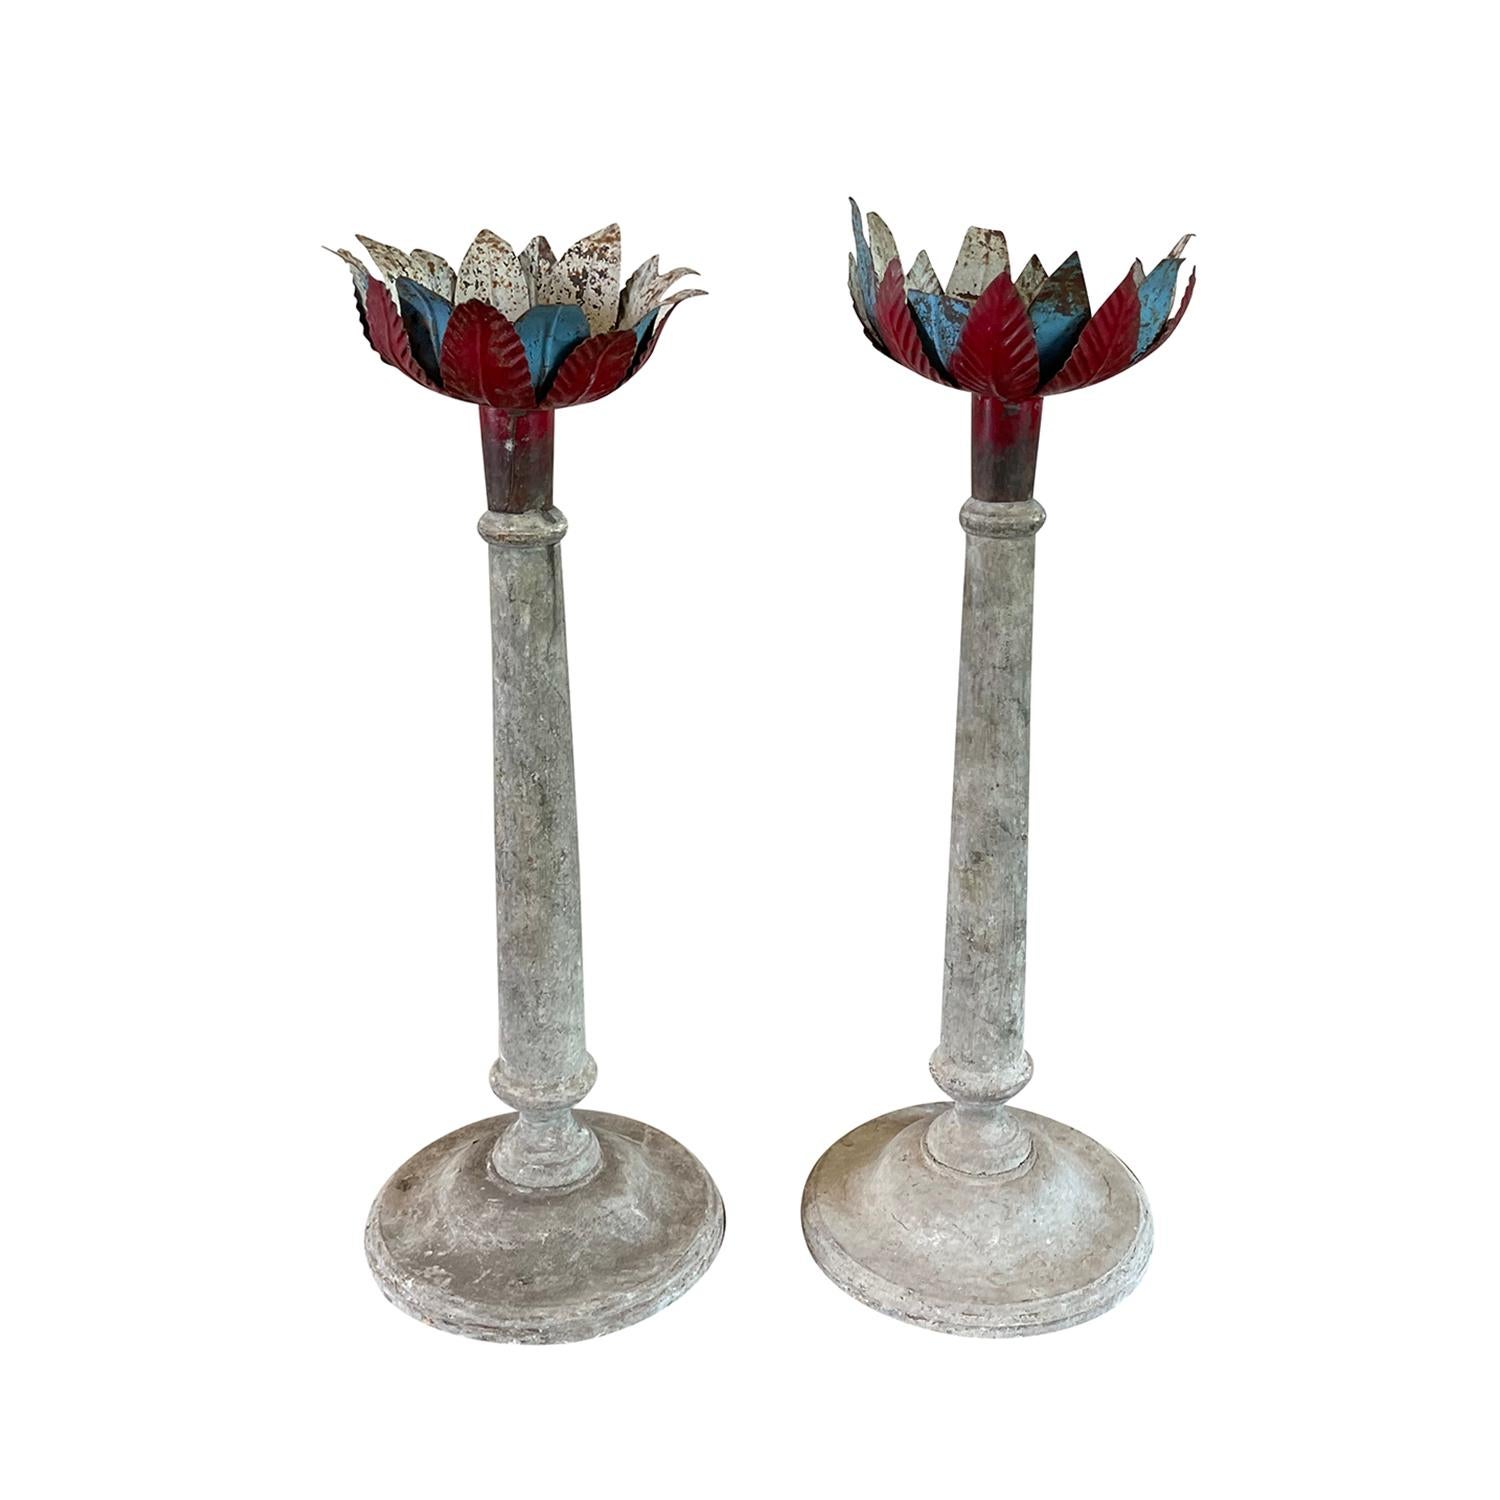 Hand-Crafted 19th Century Portuguese Pair of Pinewood Candle Holders - Antique Sticks